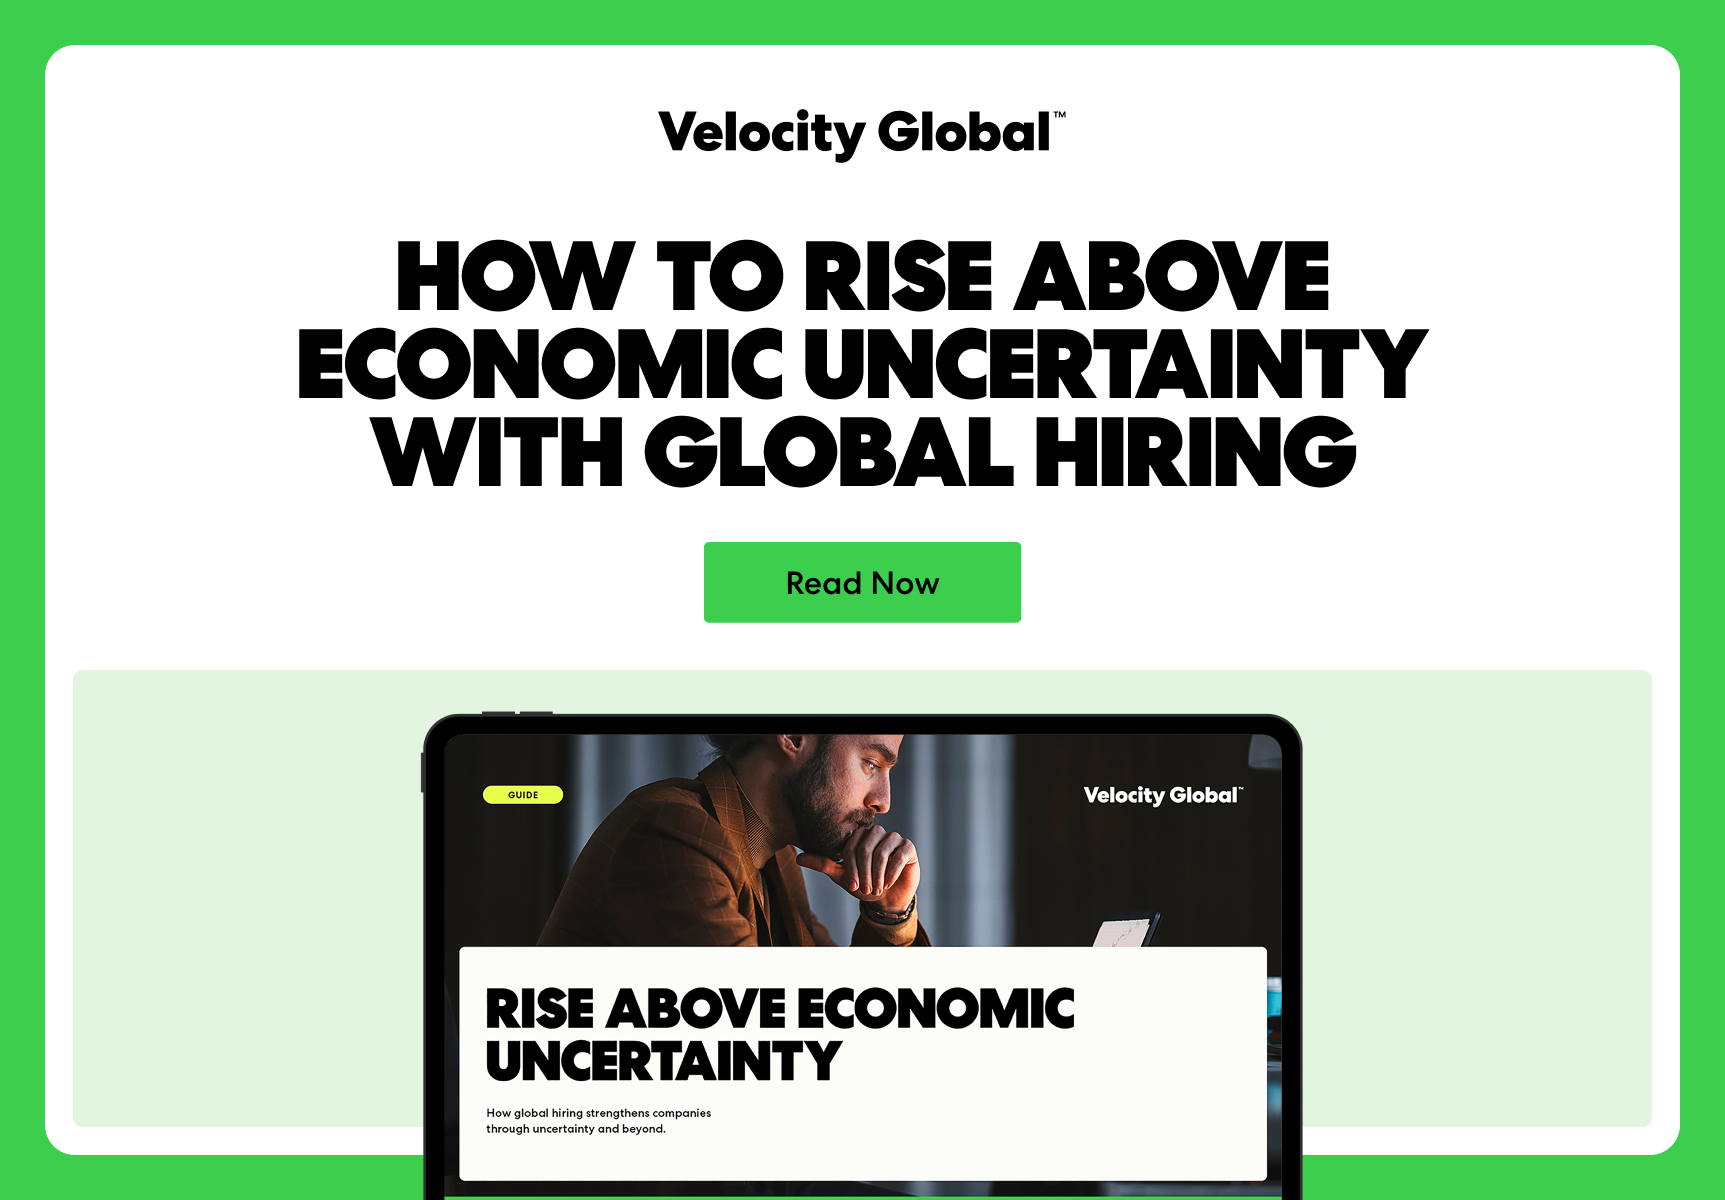 Download the "How to Rise Above Economic Uncertainty with Global Hiring" guide